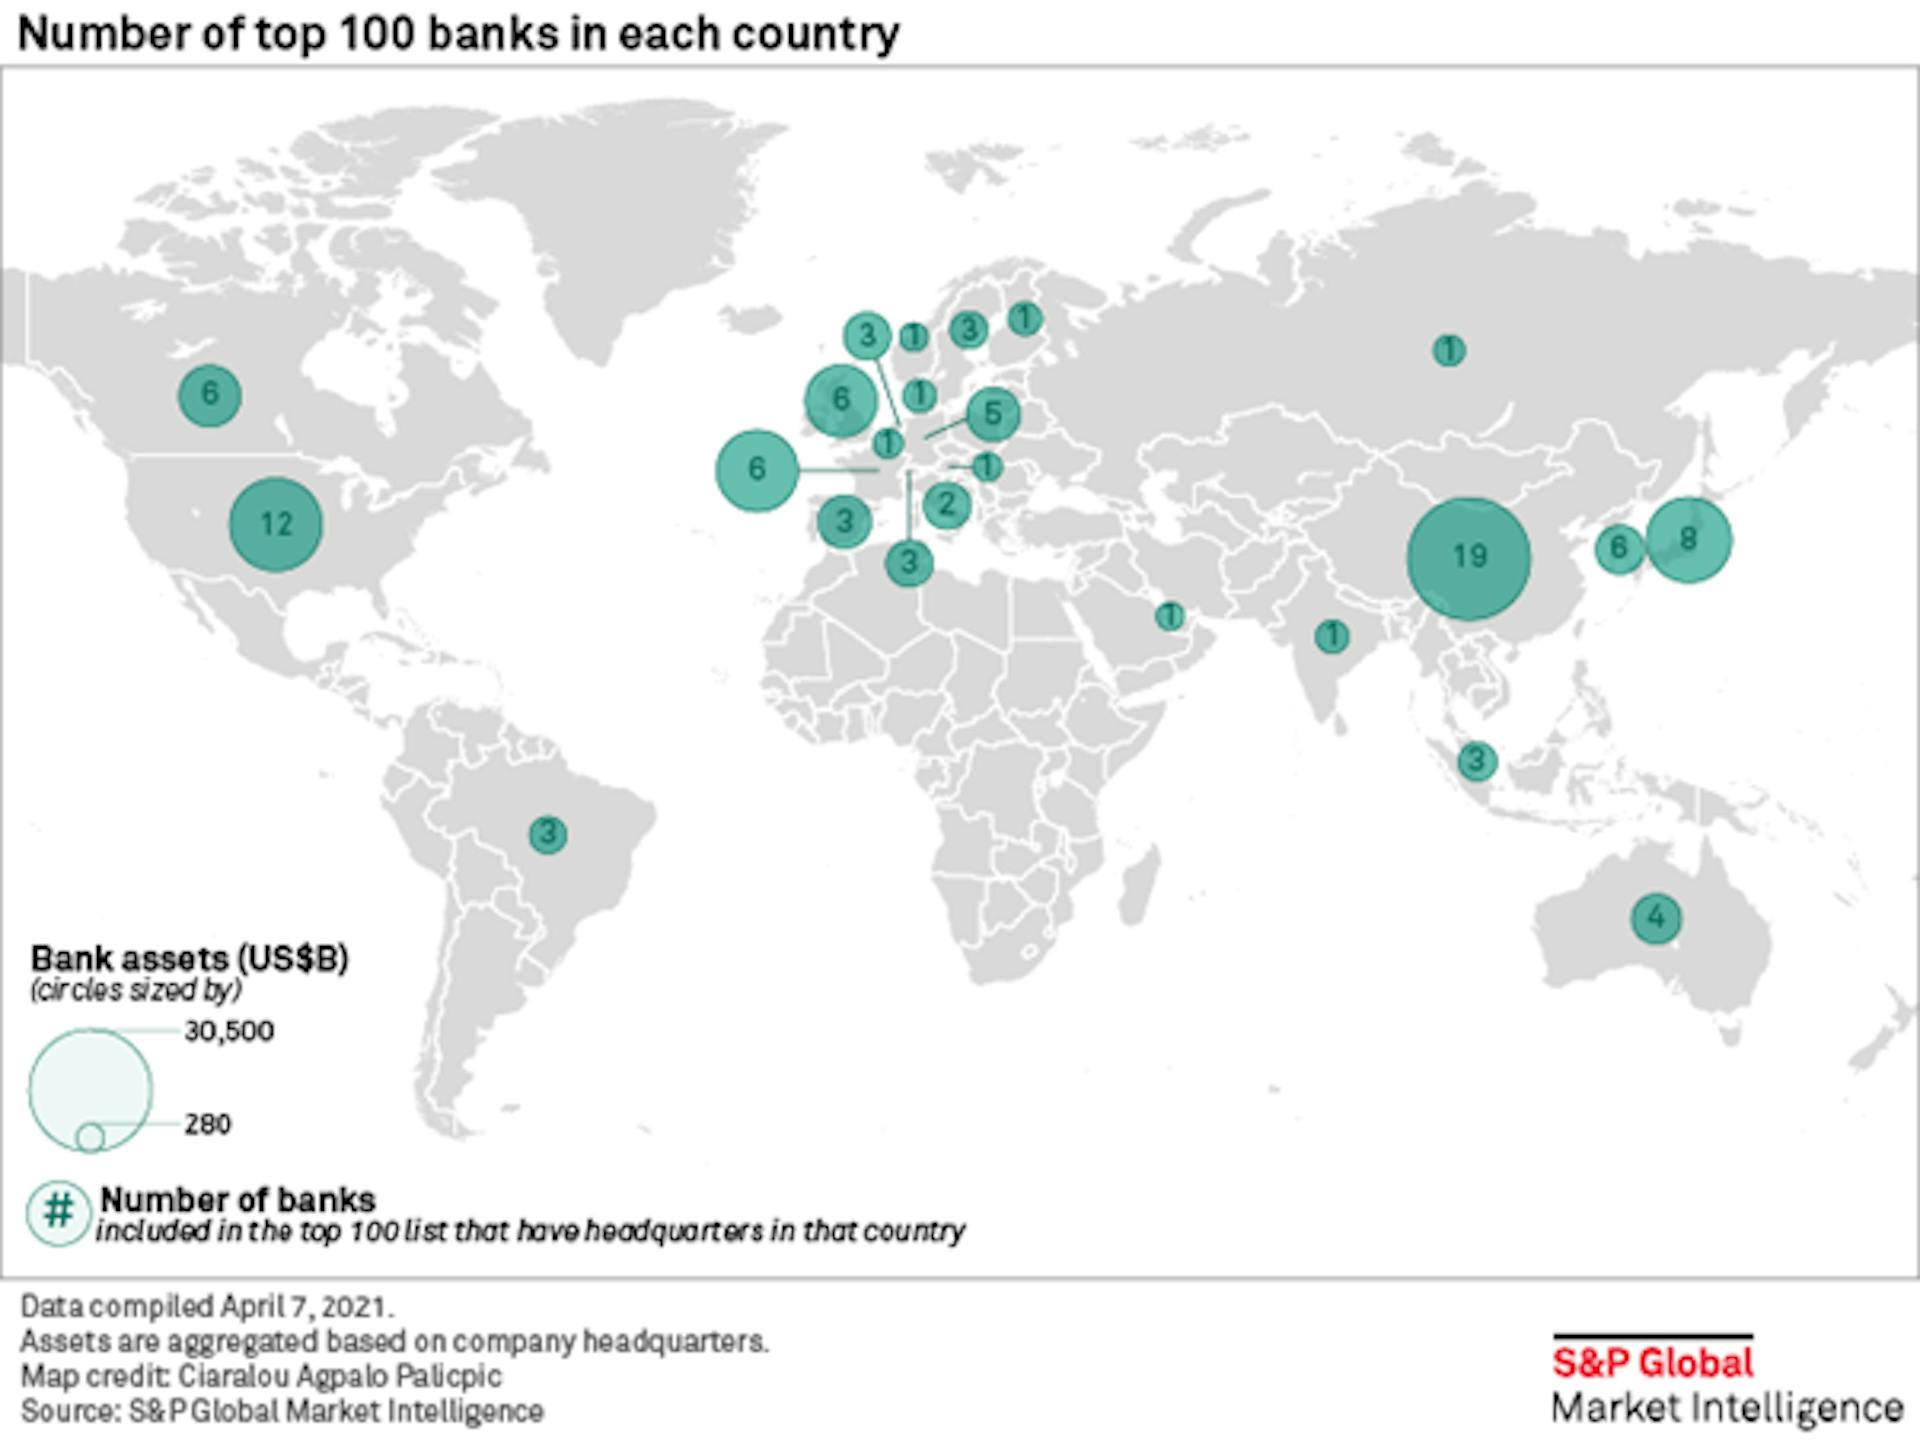 Image: Country-wise distribution of top banks worldwide